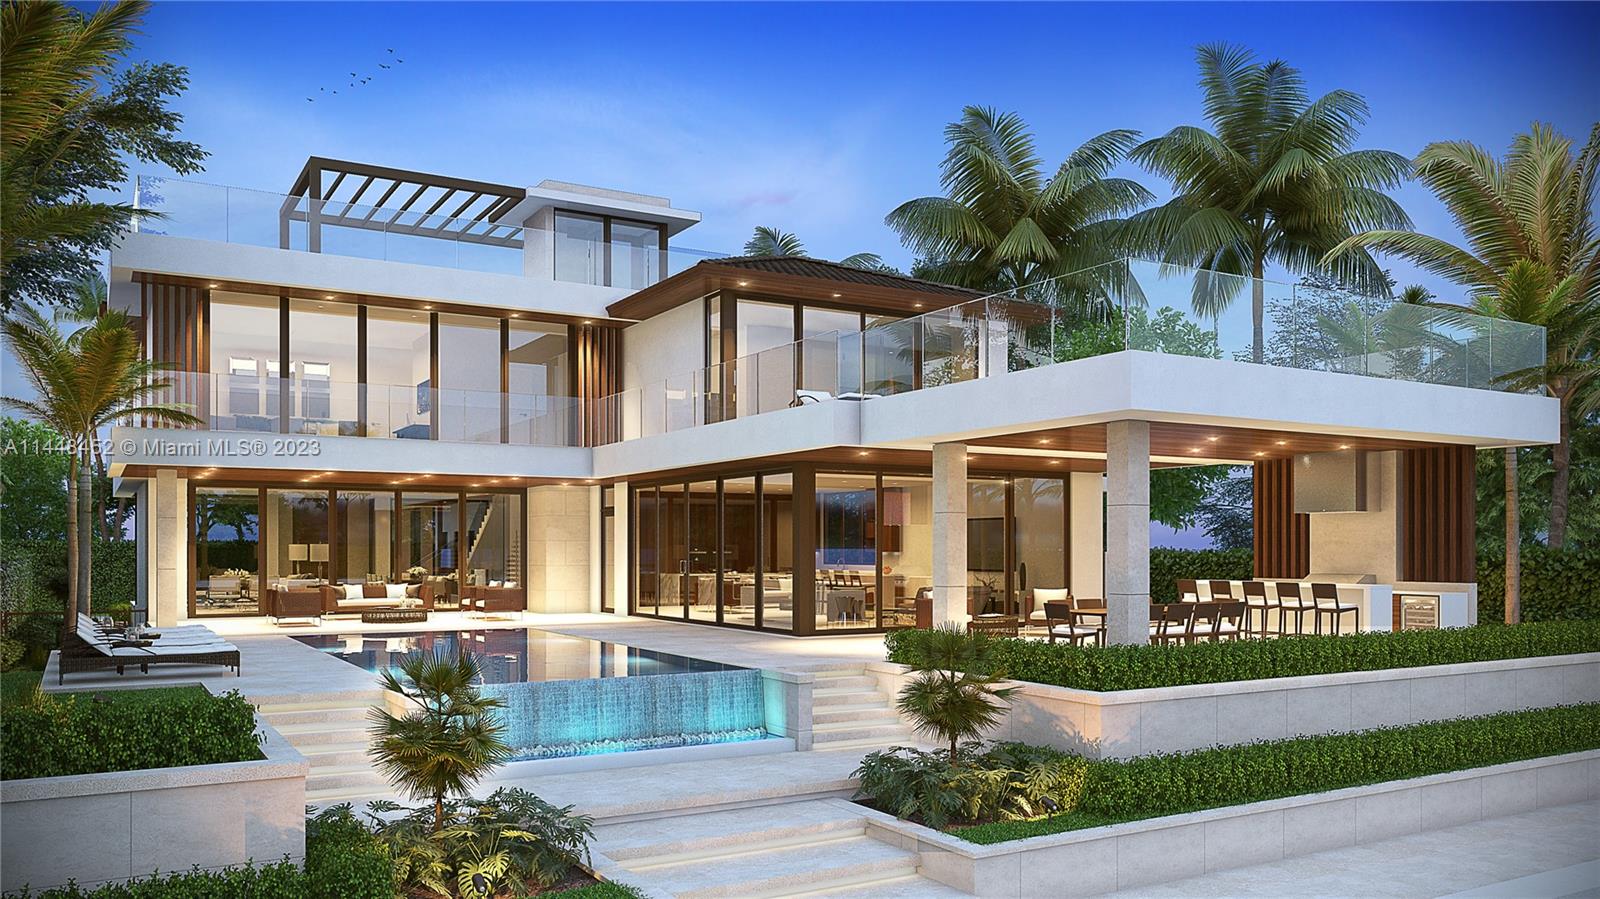 Sale price includes vacant land + approved plans + seller will complete construction of the home with finishes chosen by the buyer. Stunning tropical modern masterpiece with pristine open bay views. Featuring 75 feet of waterfront on a 11,250 sq. ft. lot, with 5,200+ sq. ft indoor space. Buy now to customize and fine-tune the finishings on this 5 bed/5.5 bath dream home. The estate boasts expansive living and family rooms that overlook the scenic bay view with seamless indoor/outdoor living. Enjoy a boat dock, pool, roof deck, elevator, outdoor kitchen, 2 car garage, gazebo & more! Located on highly coveted and gated Biscayne Point. Centrally located, and minutes away from Bal Harbour, Miami Design District, Wynwood Art District, South Beach and major private schools.